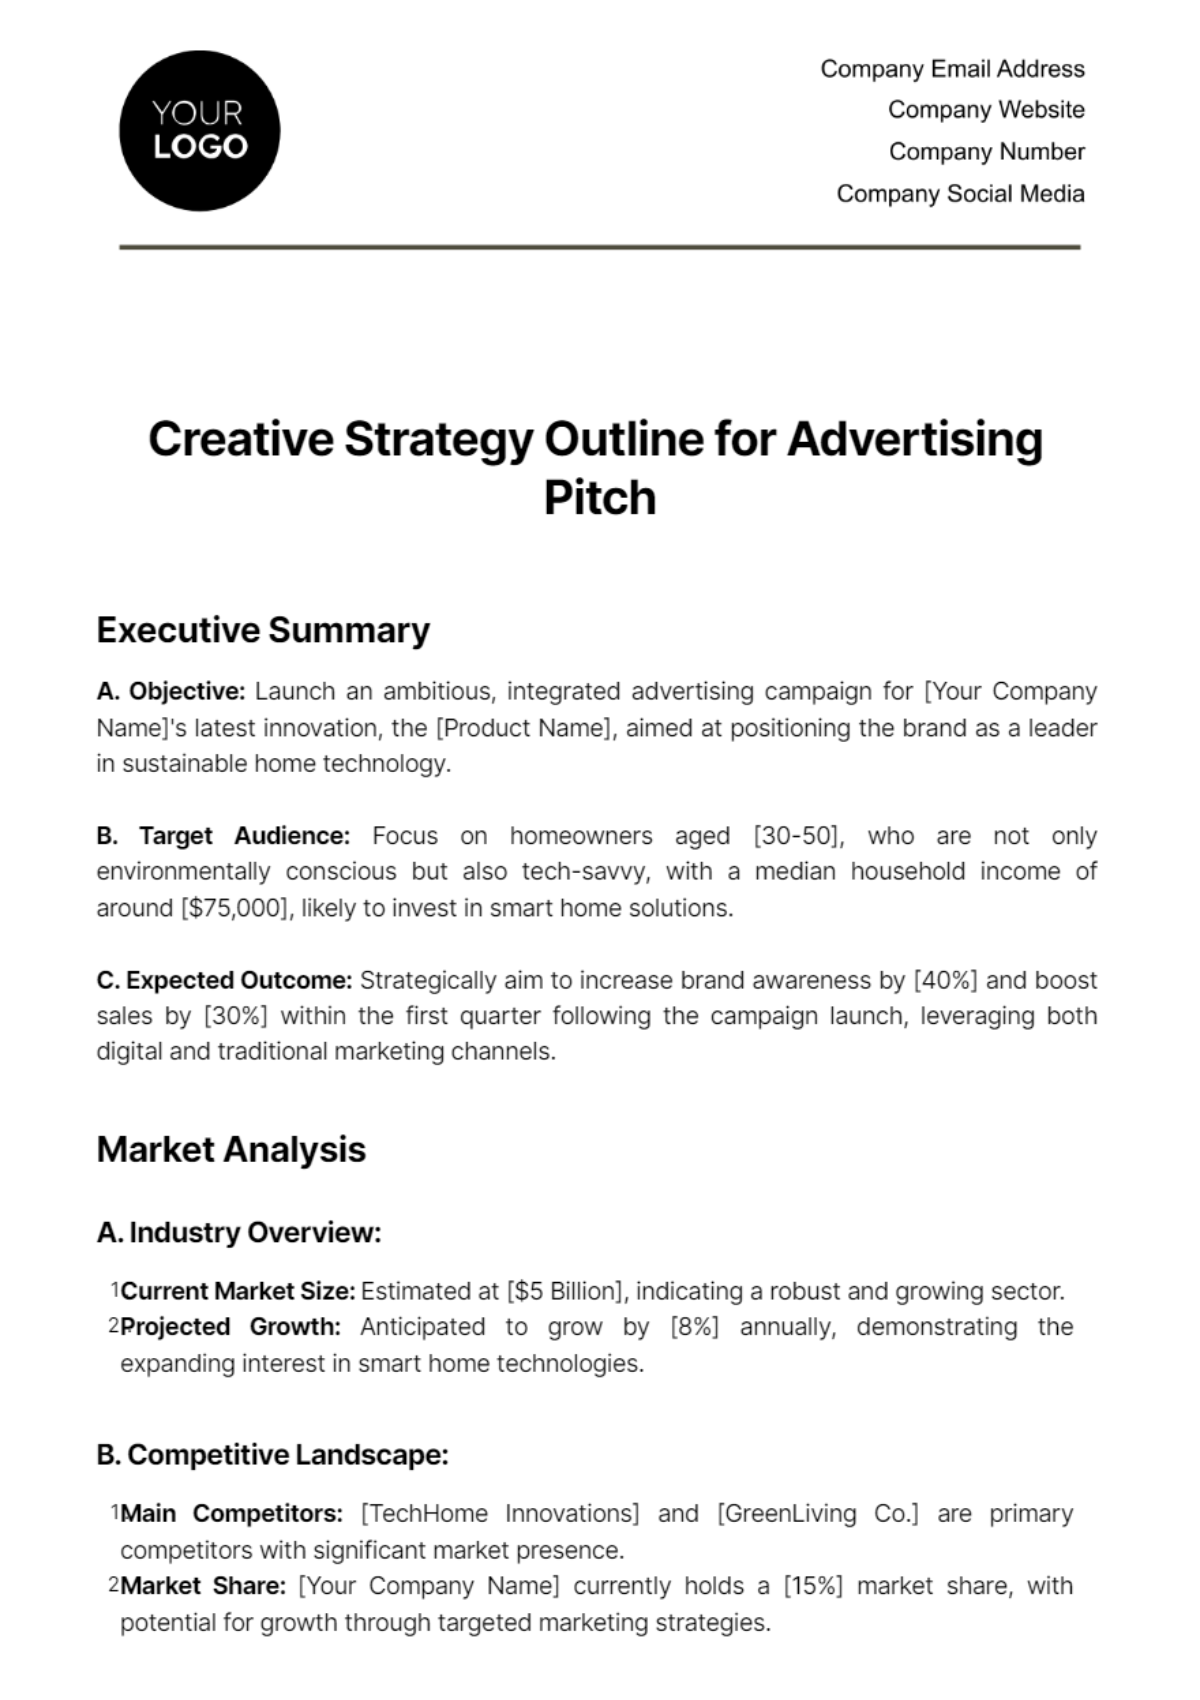 Creative Strategy Outline for Advertising Pitch Template